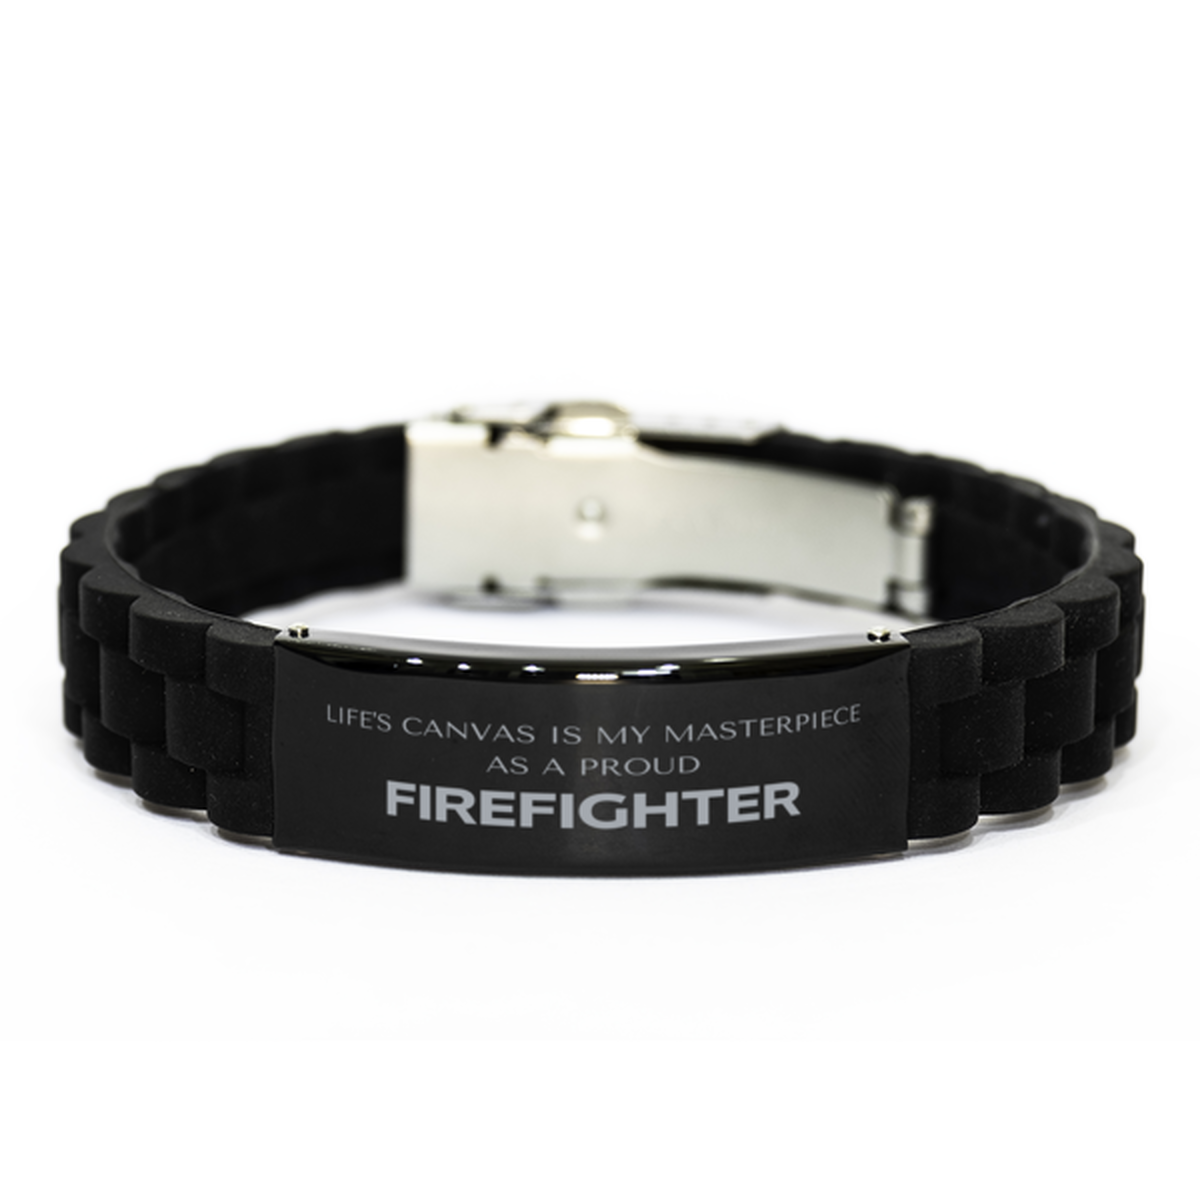 Proud Firefighter Gifts, Life's canvas is my masterpiece, Epic Birthday Christmas Unique Black Glidelock Clasp Bracelet For Firefighter, Coworkers, Men, Women, Friends